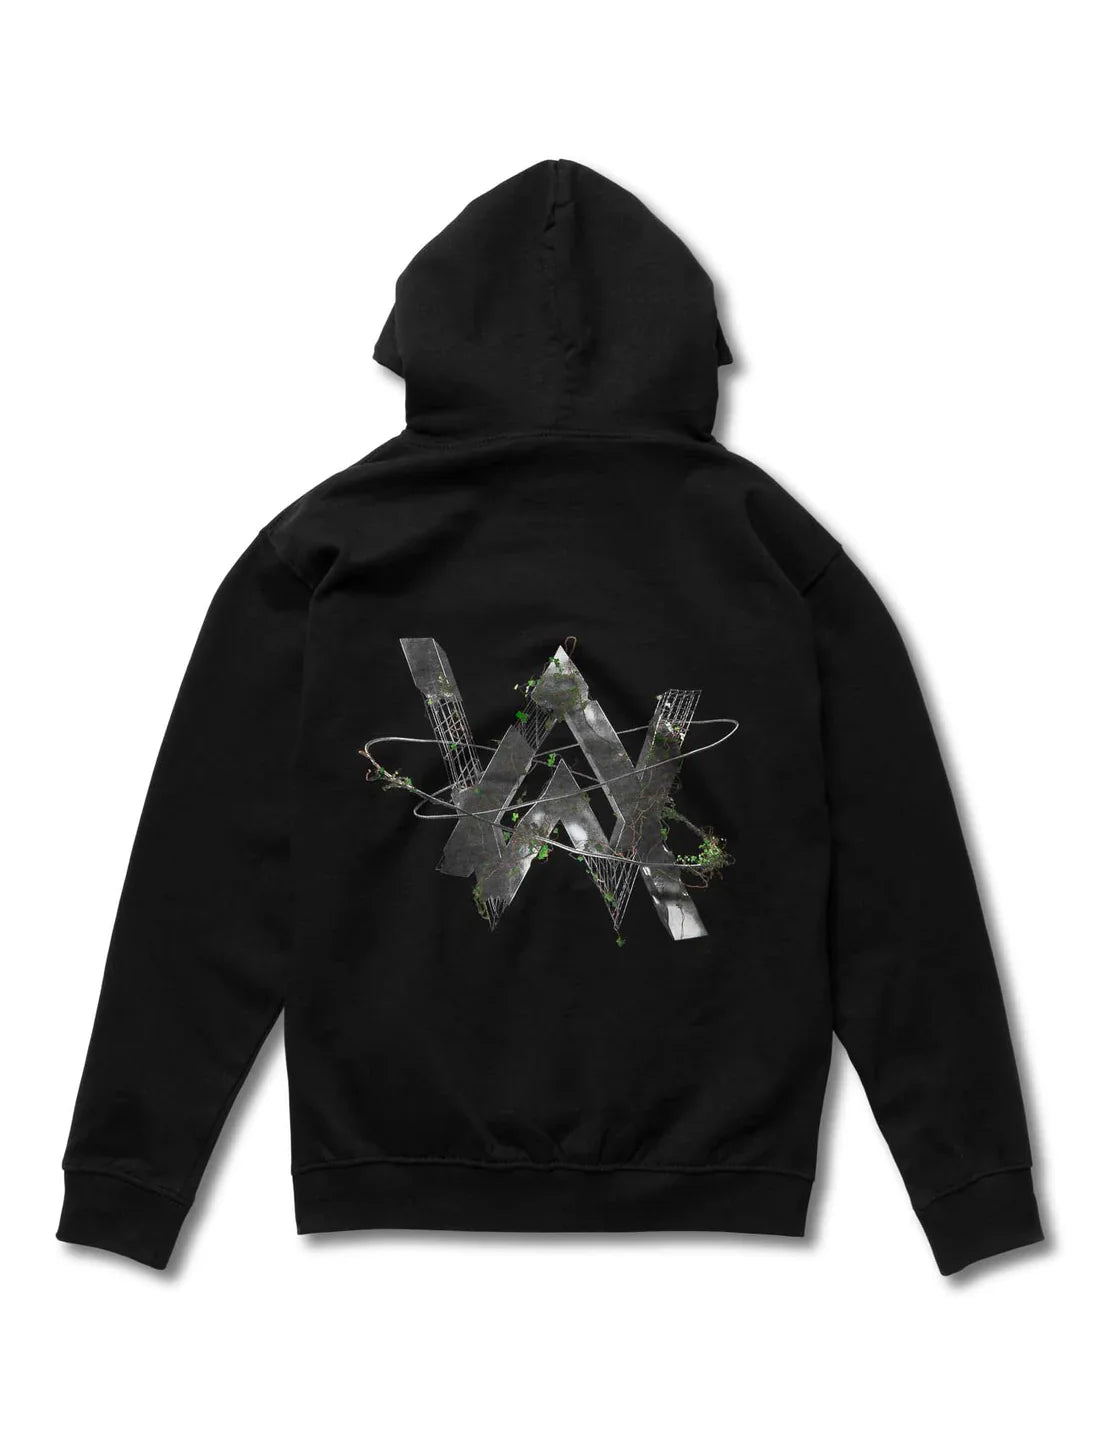 Rear view of black Alan Walker hoodie featuring intricate satellite and nature design.